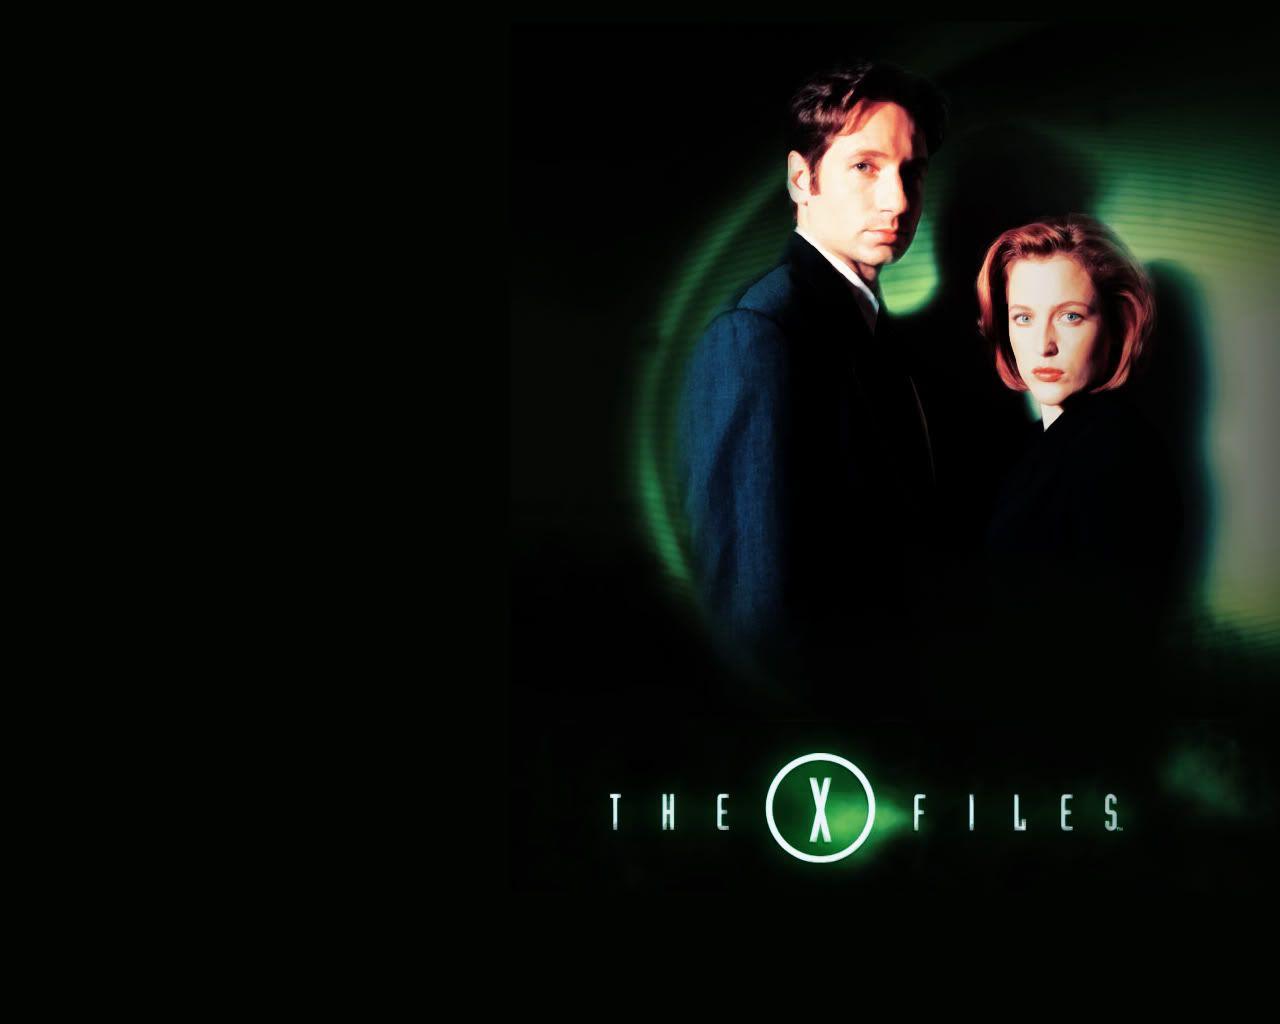 The X Files Wallpaper, Mulder And Scully. TV Fanart, Wallpaper & Icon